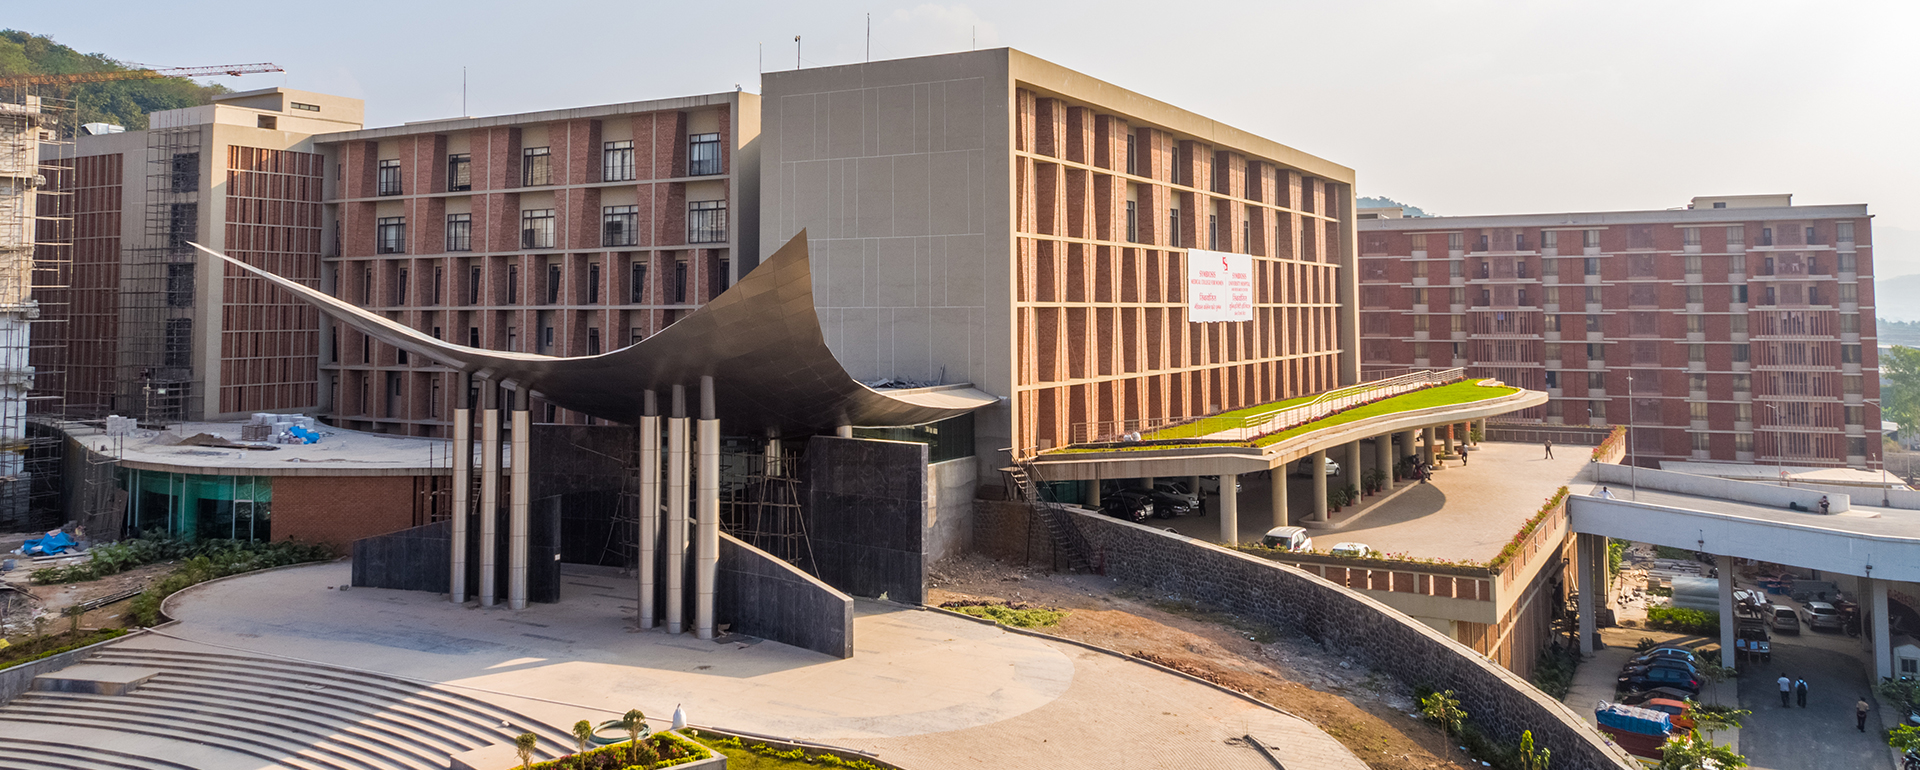 Symbiosis University Hospital and Research Centre at Lavale, Pune